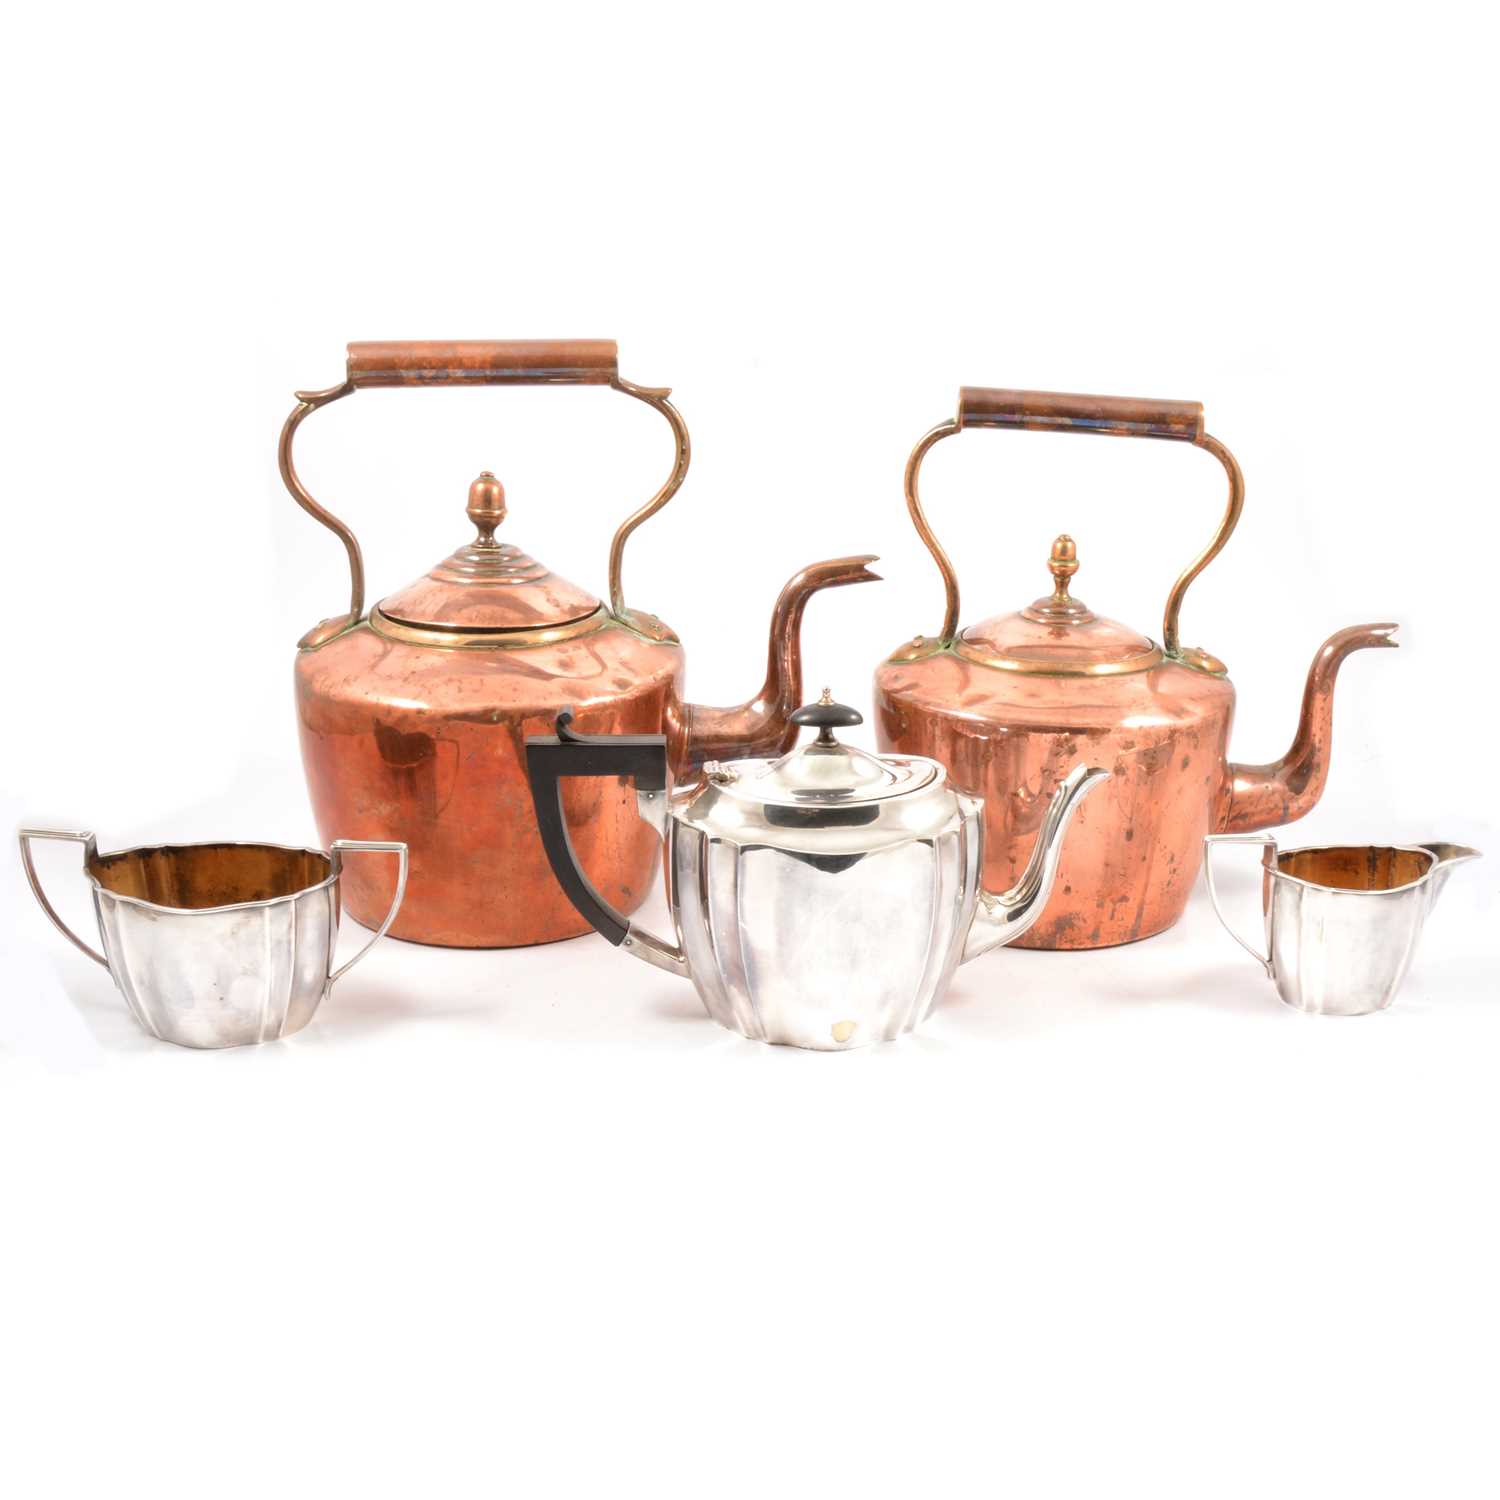 Lot 51 - China teaset and electroplated three-piece teaset and two Victorian copper and brass kettles.